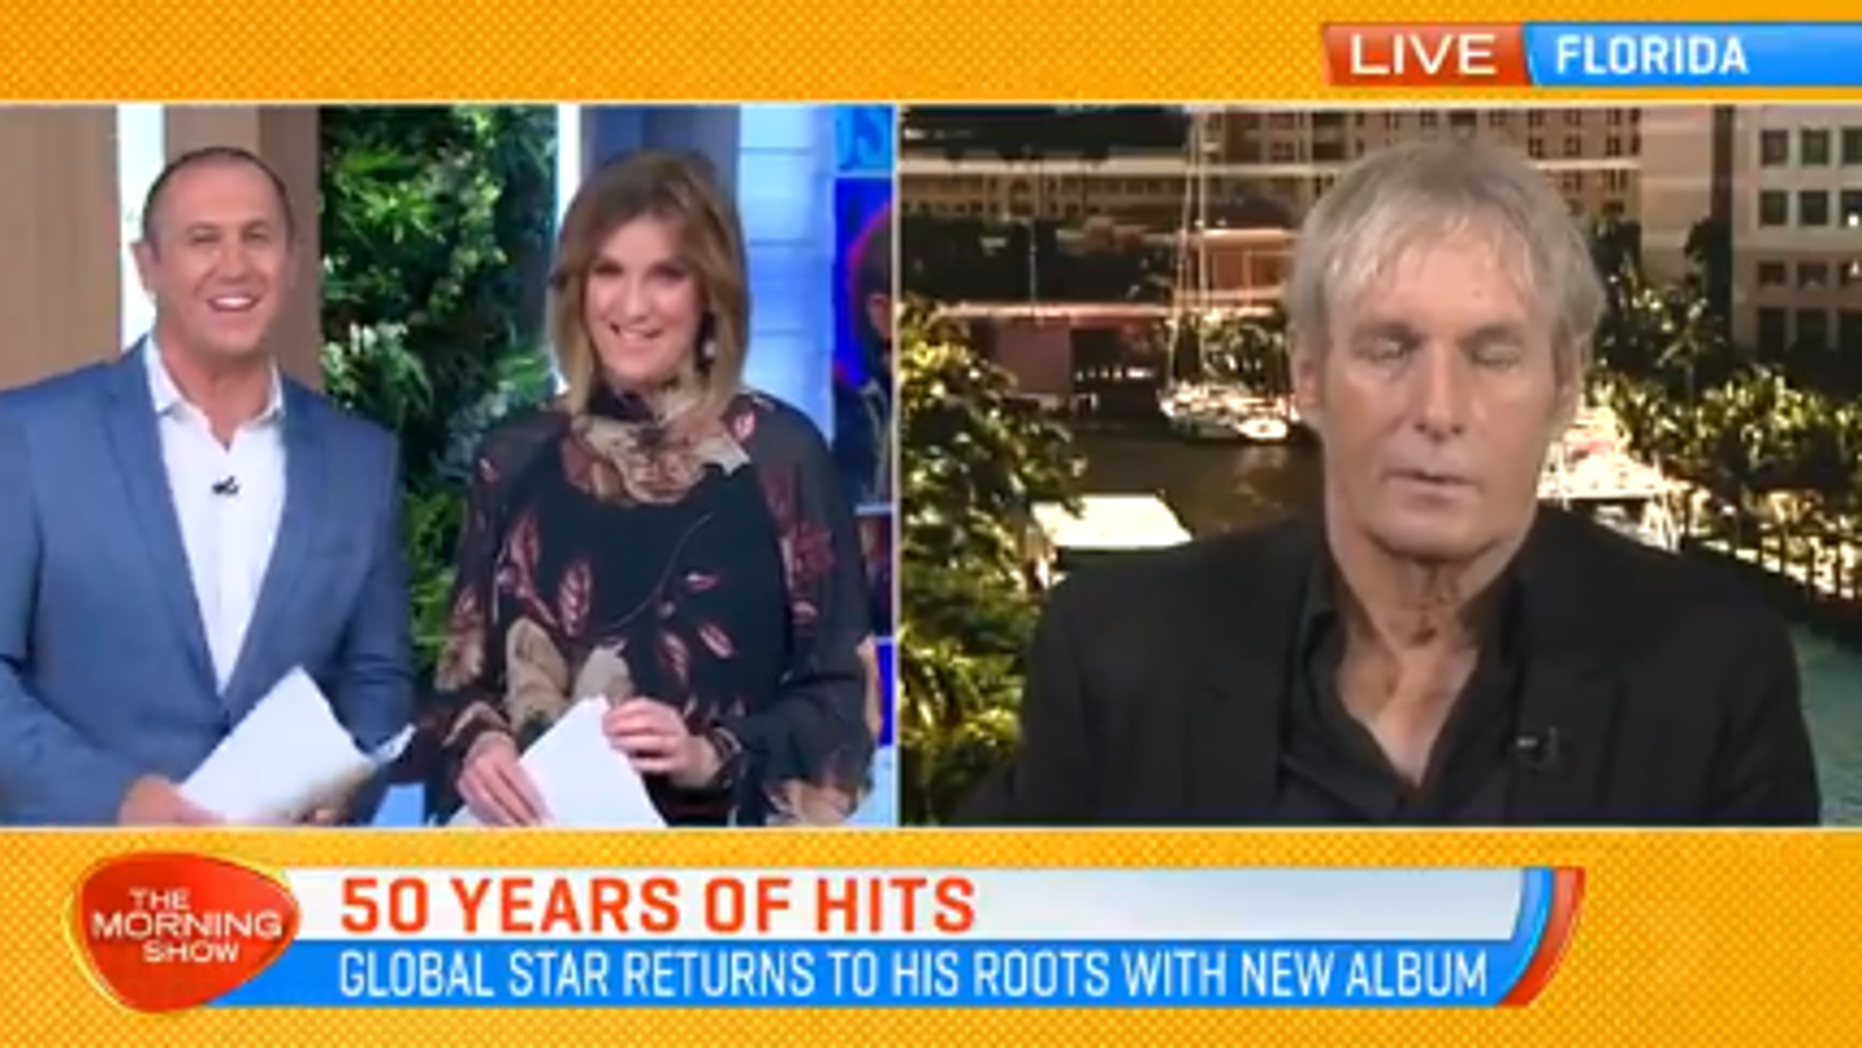 Michael Bolton appears to fall asleep during live TV interview, blames 